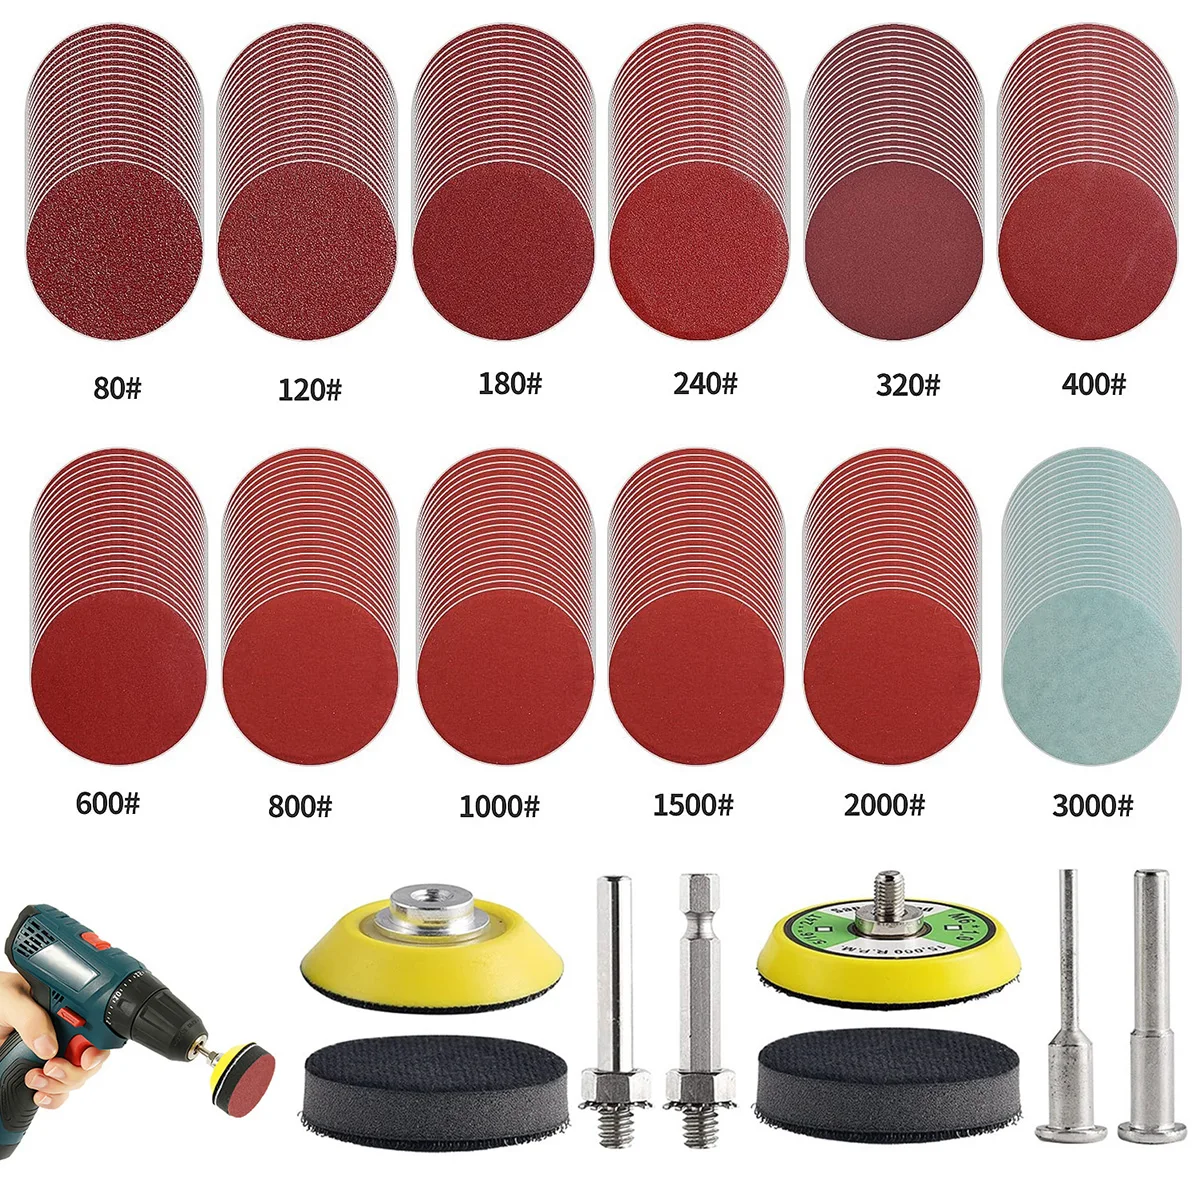 Sanding Disc Pad 2Inch Sanding Pads 80-3000 Grit Sanding Paper Quick Change Sanding Sheet Drill Grinder Rotary Tools Accessories